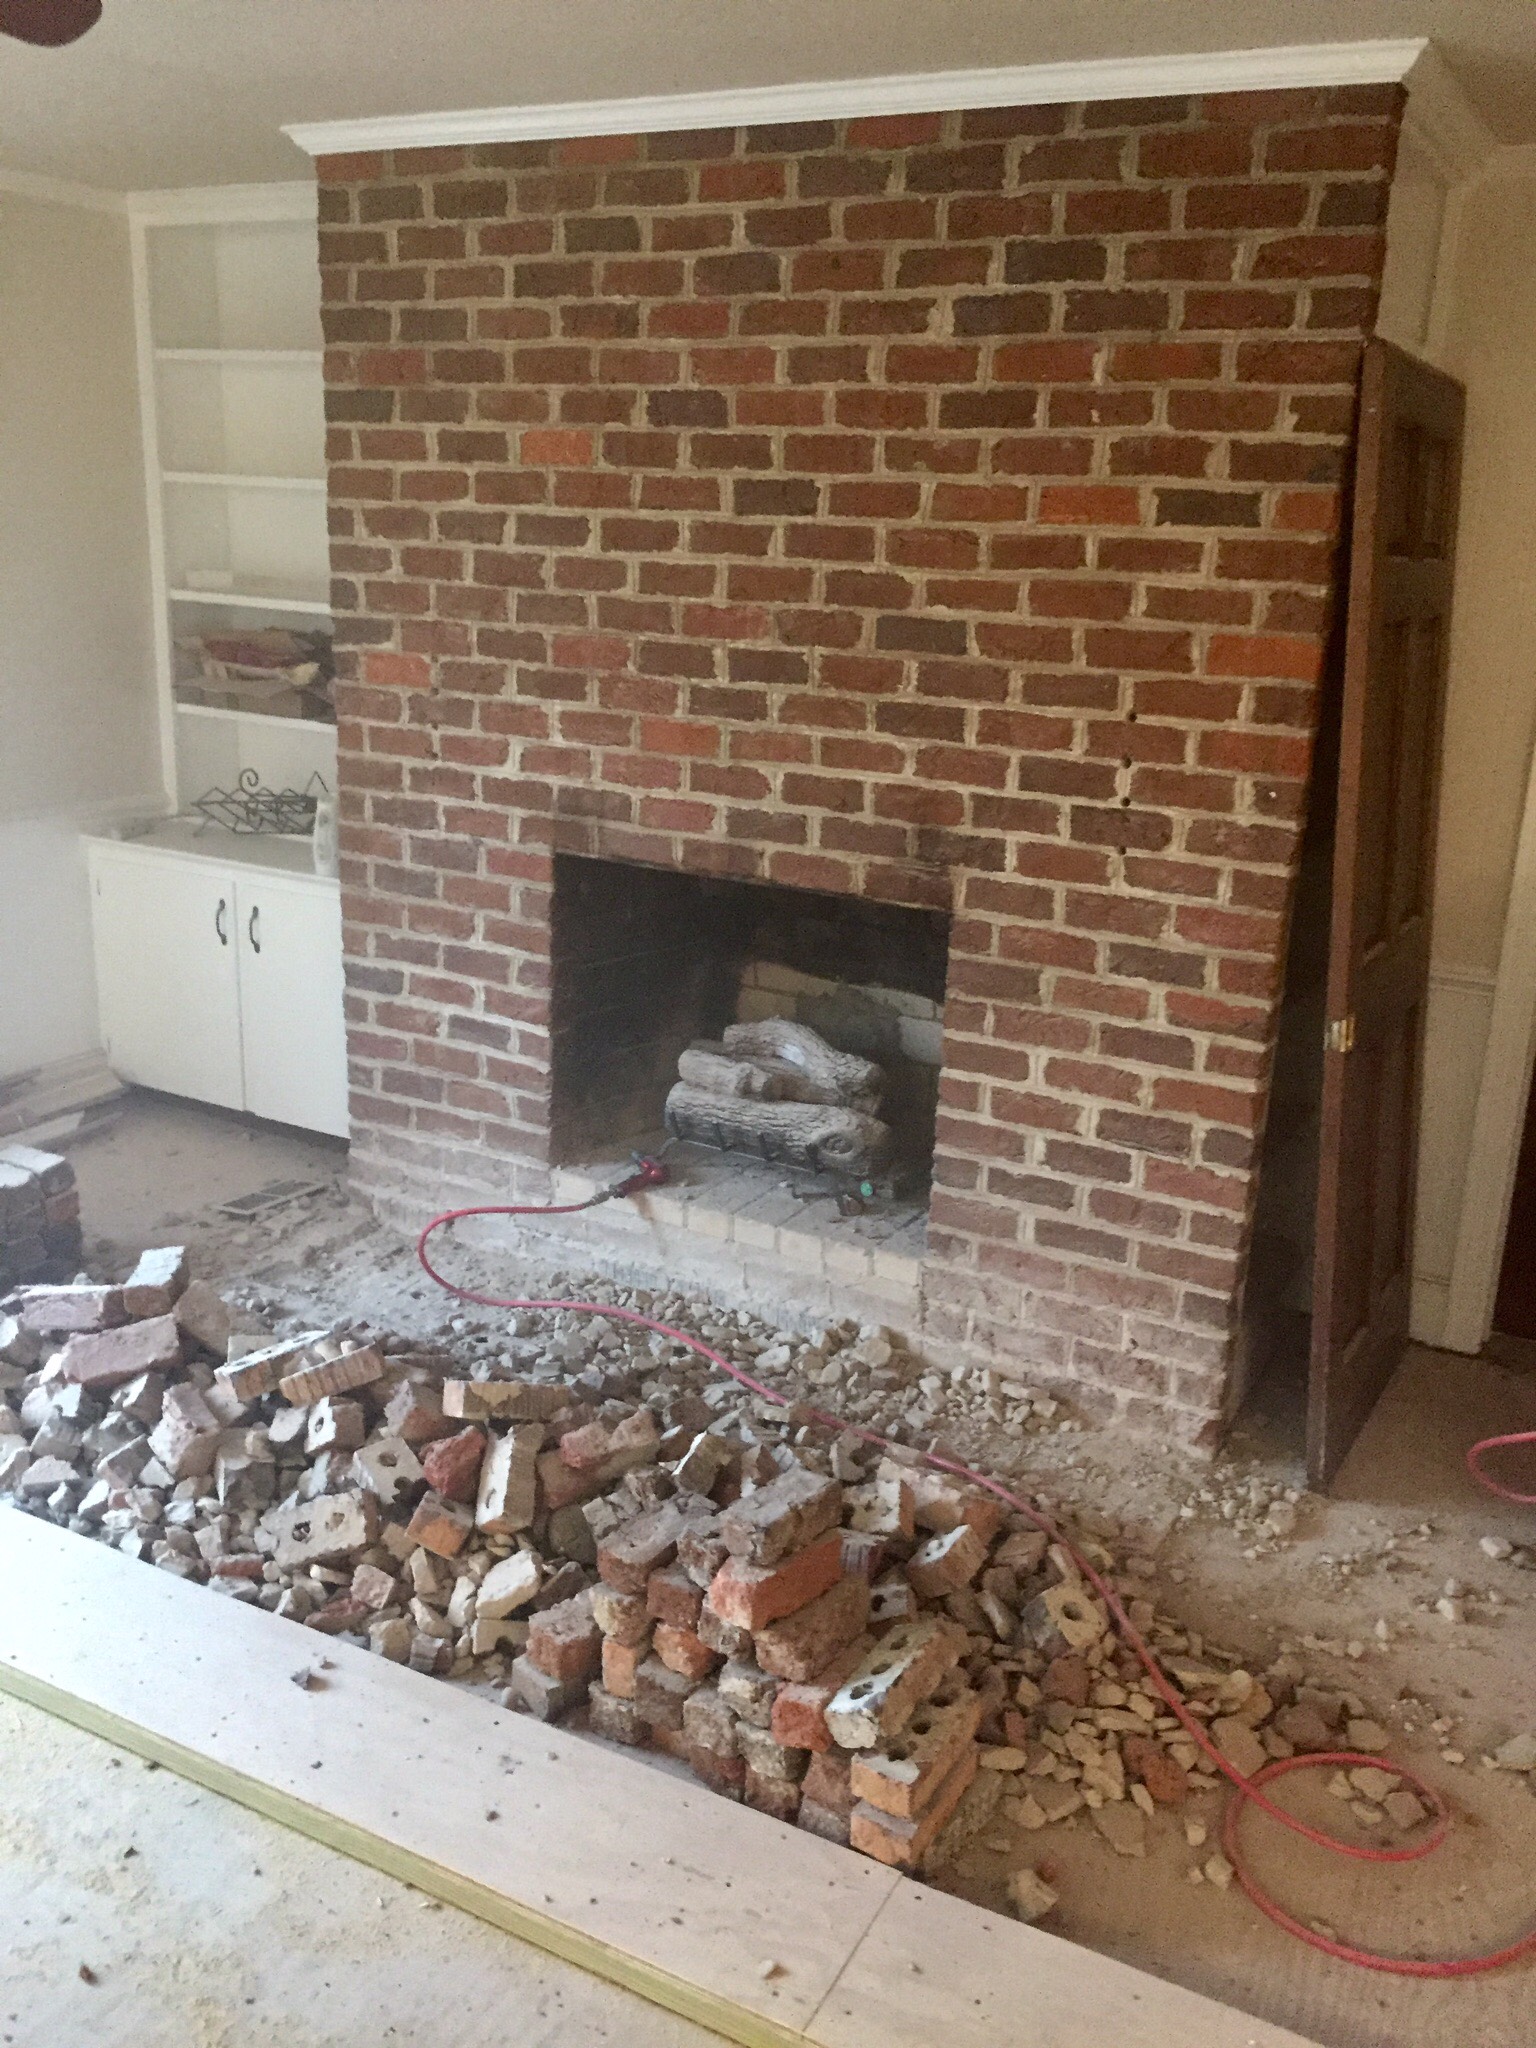 Covering A Brick Fireplace Easy Diy, Covering A Brick Fireplace Wall